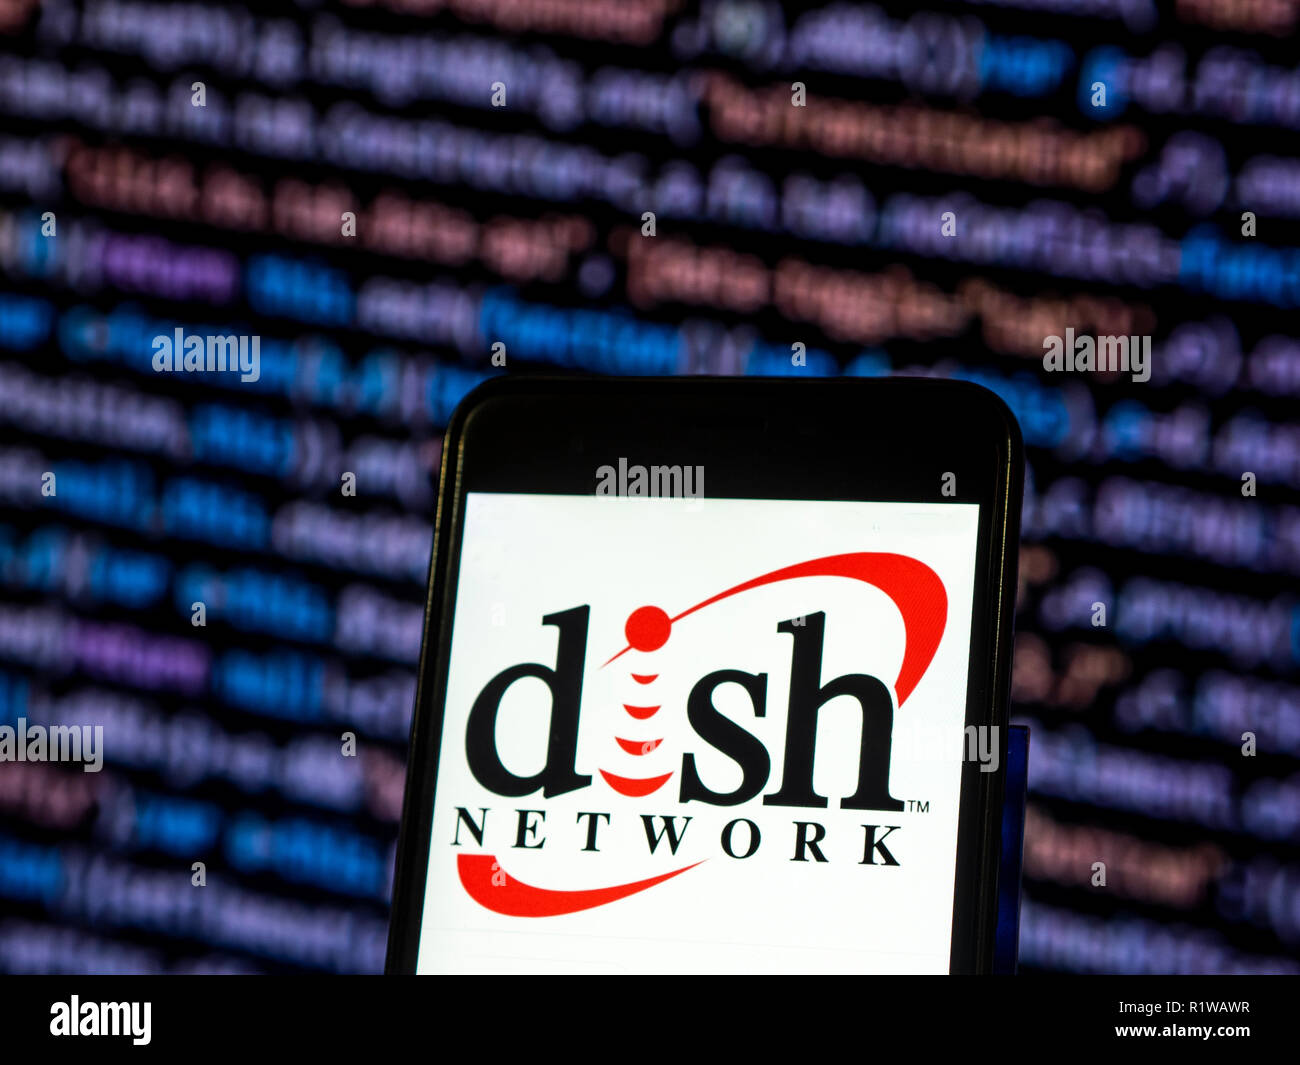 Dish Network Satellite television company logo seen displayed on ...